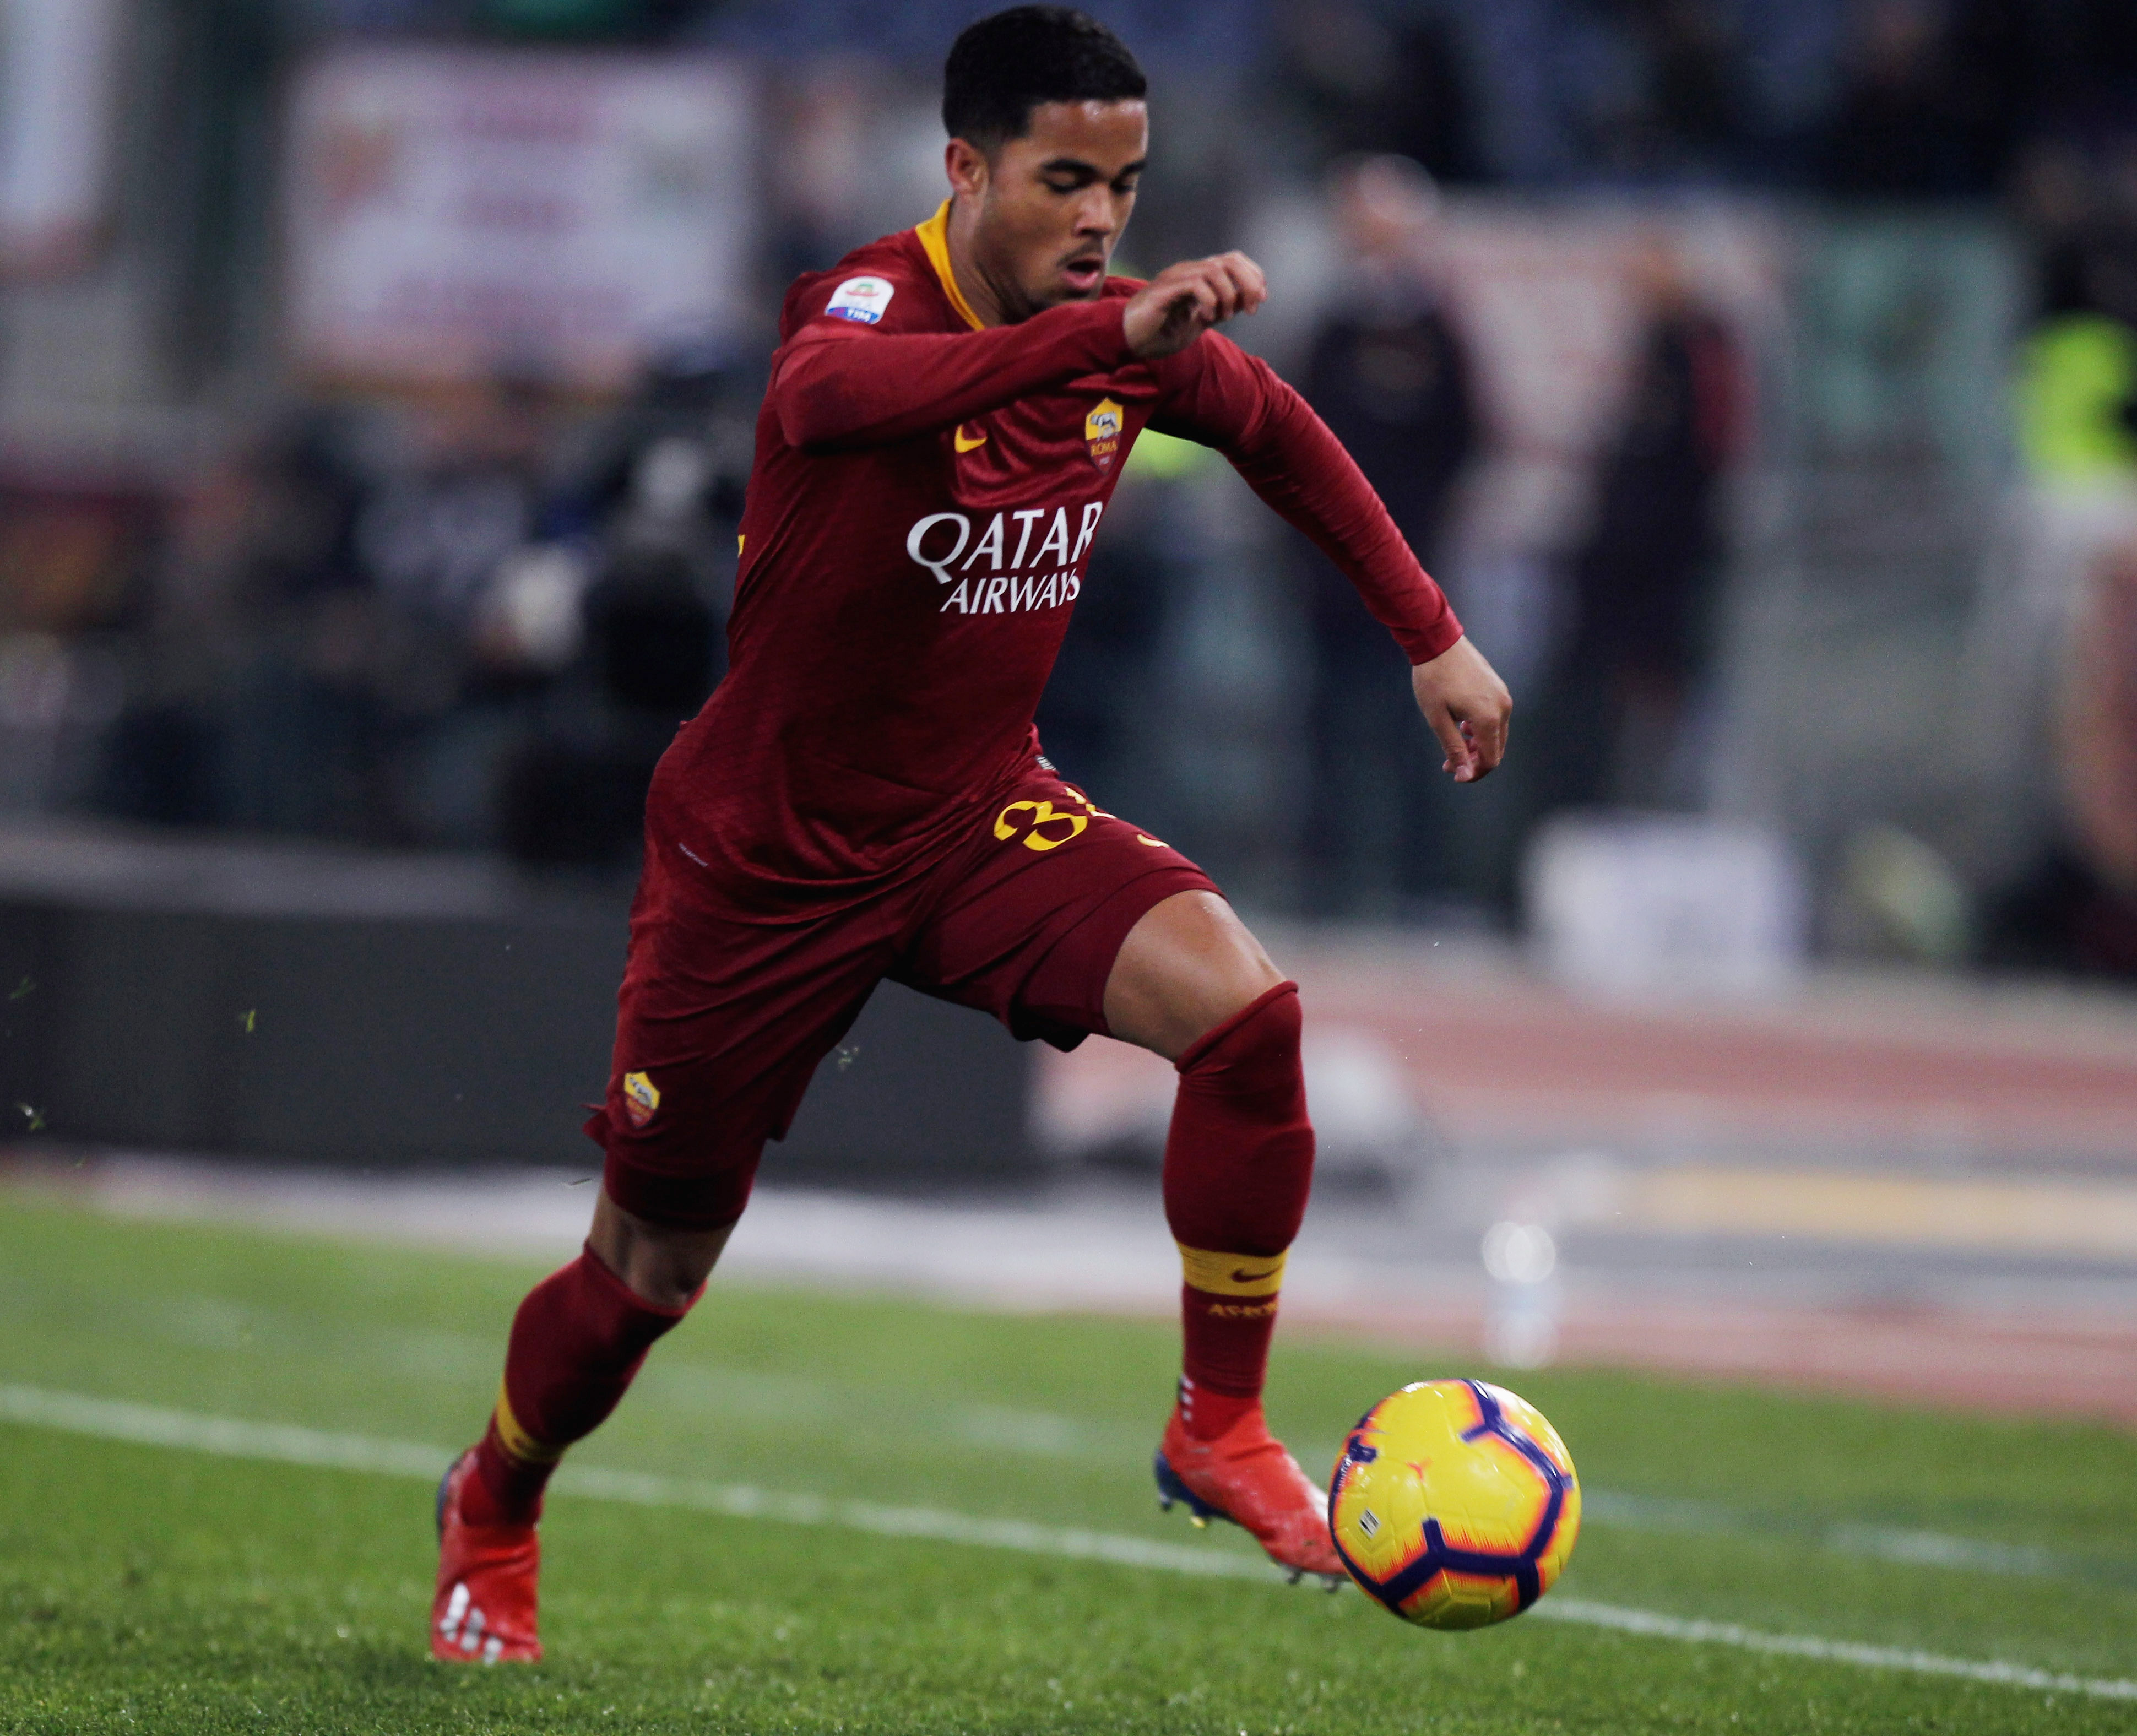 ROME, ITALY - FEBRUARY 18:  Justin Kluivert of AS Roma kicks the ball during the Serie A match between AS Roma and Bologna FC at Stadio Olimpico on February 18, 2019 in Rome, Italy.  (Photo by Paolo Bruno/Getty Images)